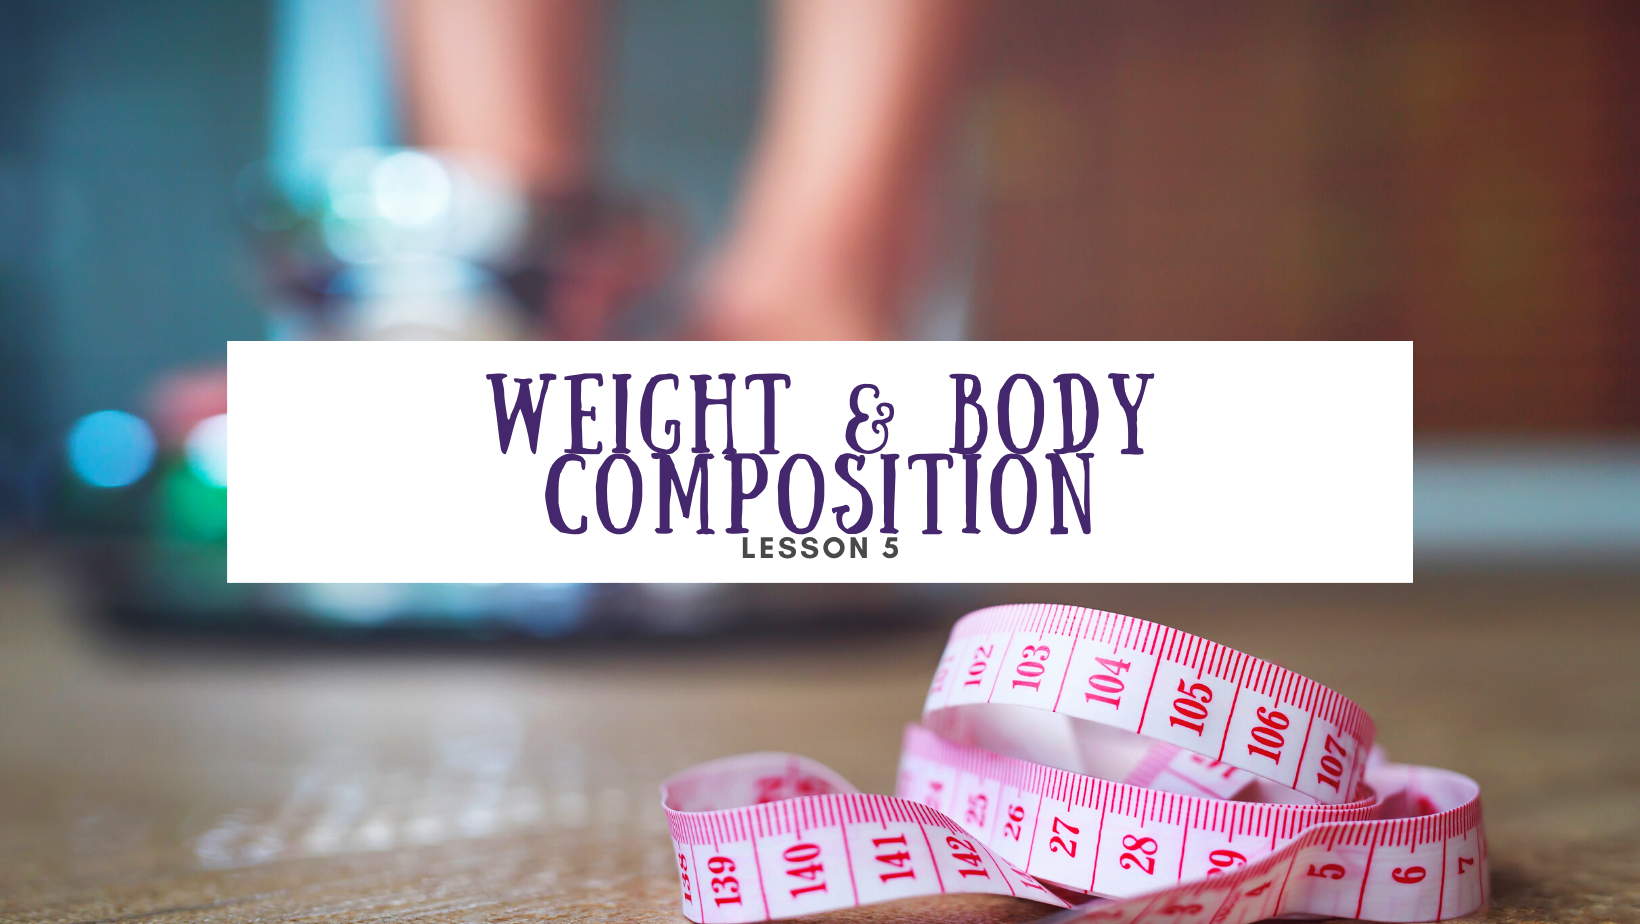 Lesson 5 Weight & body composition